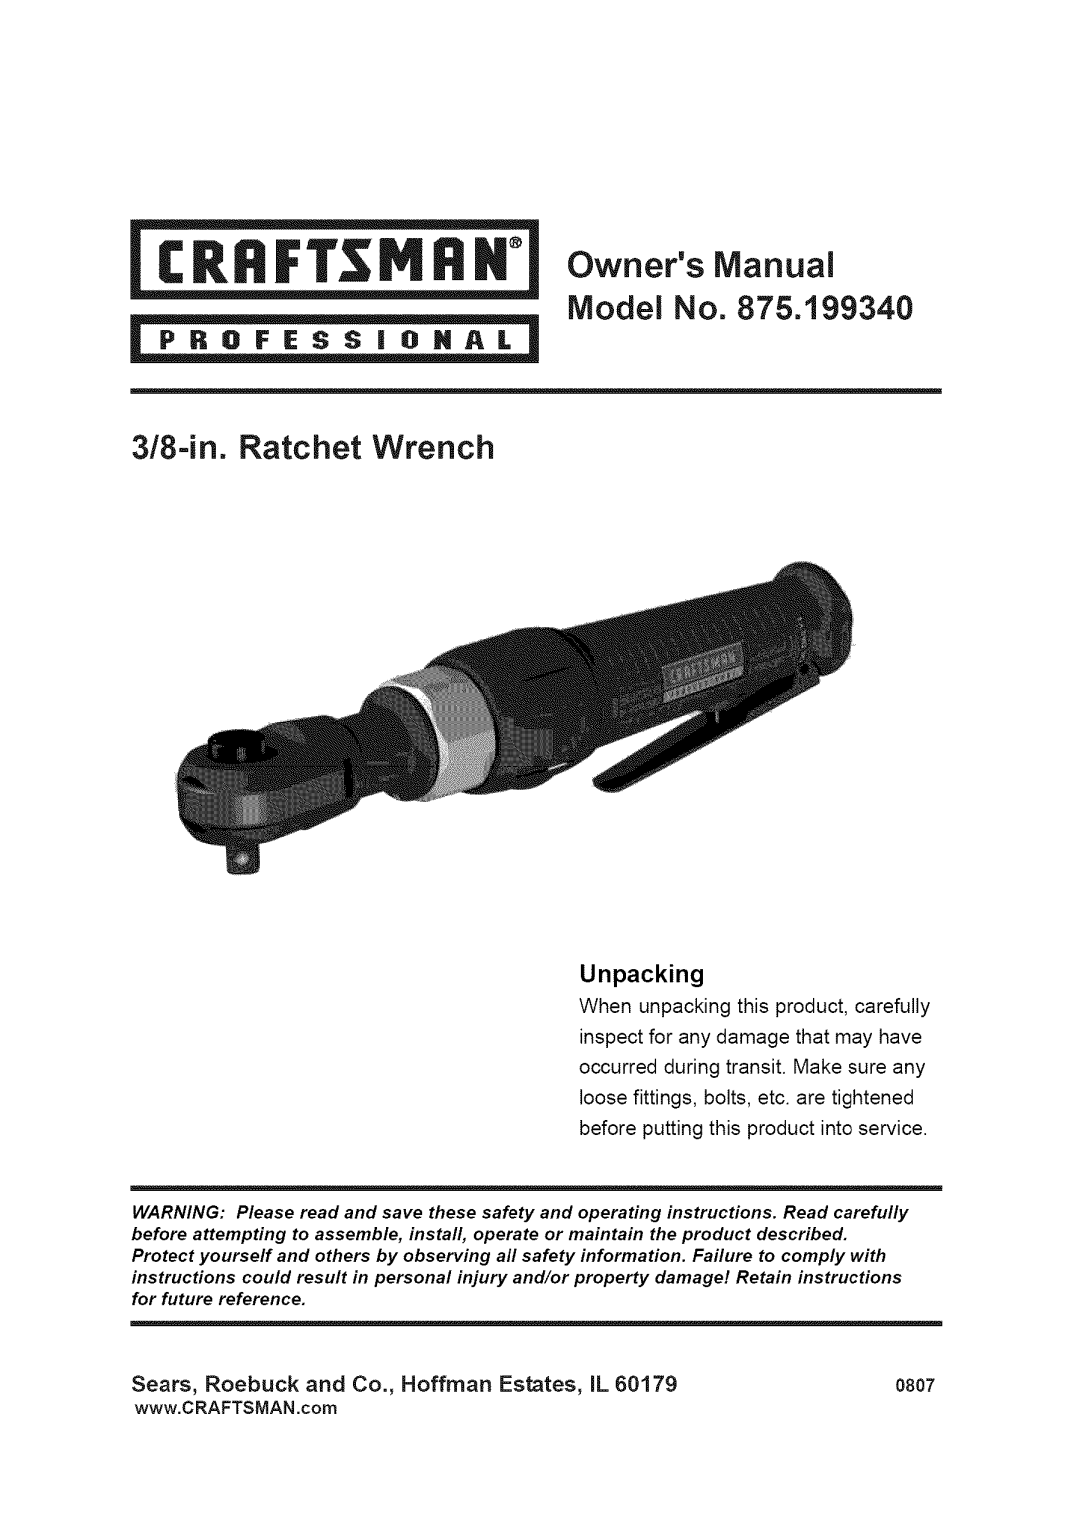 Craftsman 875.19934 owner manual OwnersManual Model No, 3/8-in. Ratchet Wrench, Unpacking 